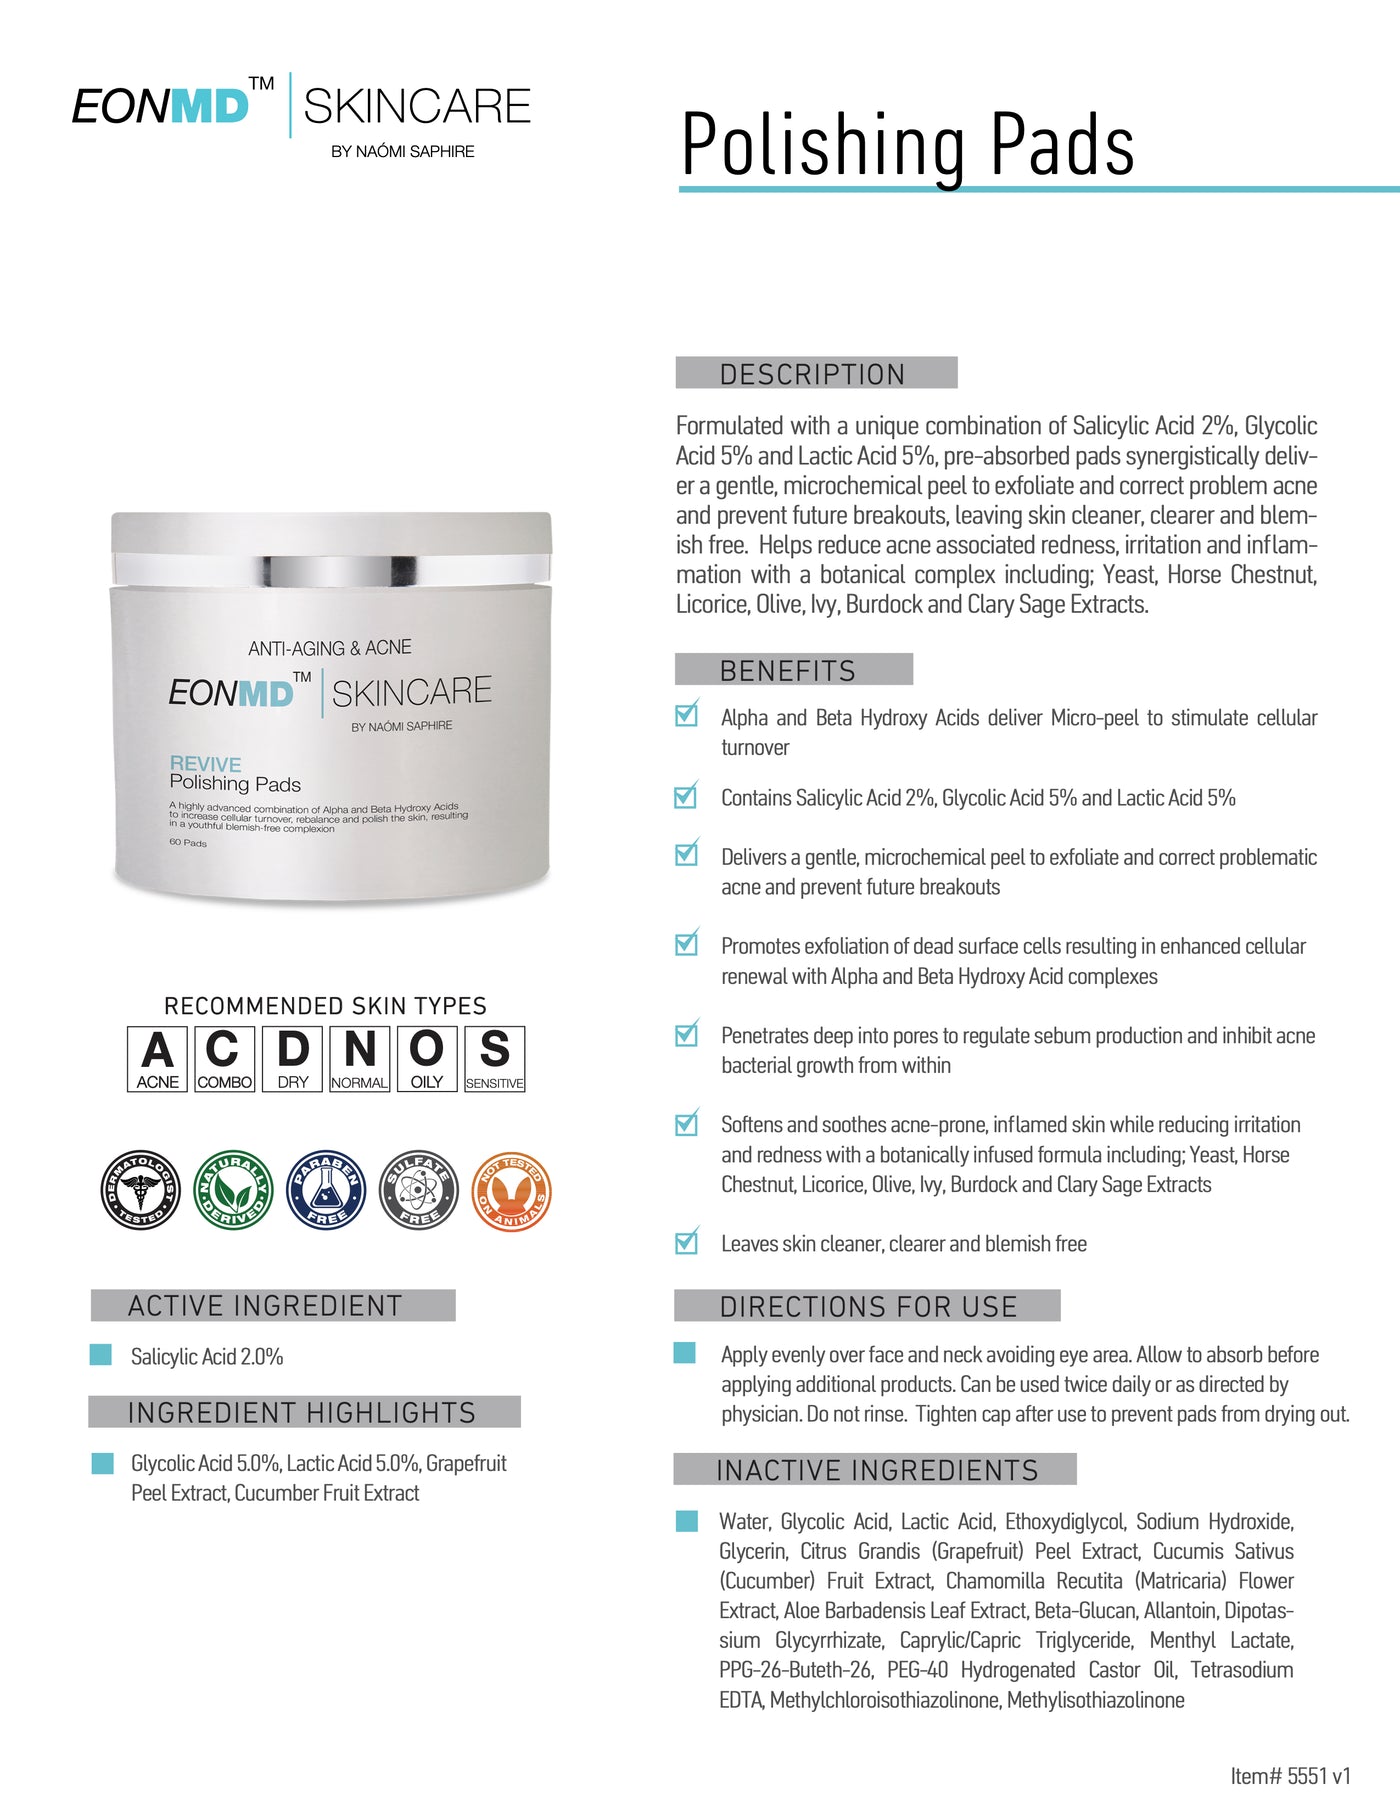 Formulated with a unique combination of Salicylic Acid 2%, Glycolic Acid 5% and Lactic Acid 5%, pre-absorbed pads synergistically deliver a gentle, microchemical peel to exfoliate and correct problem acne and prevent future breakouts, leaving skin cleaner, clearer and blemish-free. Helps reduce acne-associated redness, irritation and inflammation with a botanical complex including; Yeast, Horse Chestnut, Licorice, Olive, Ivy, Burdock and Clary Sage Extracts.